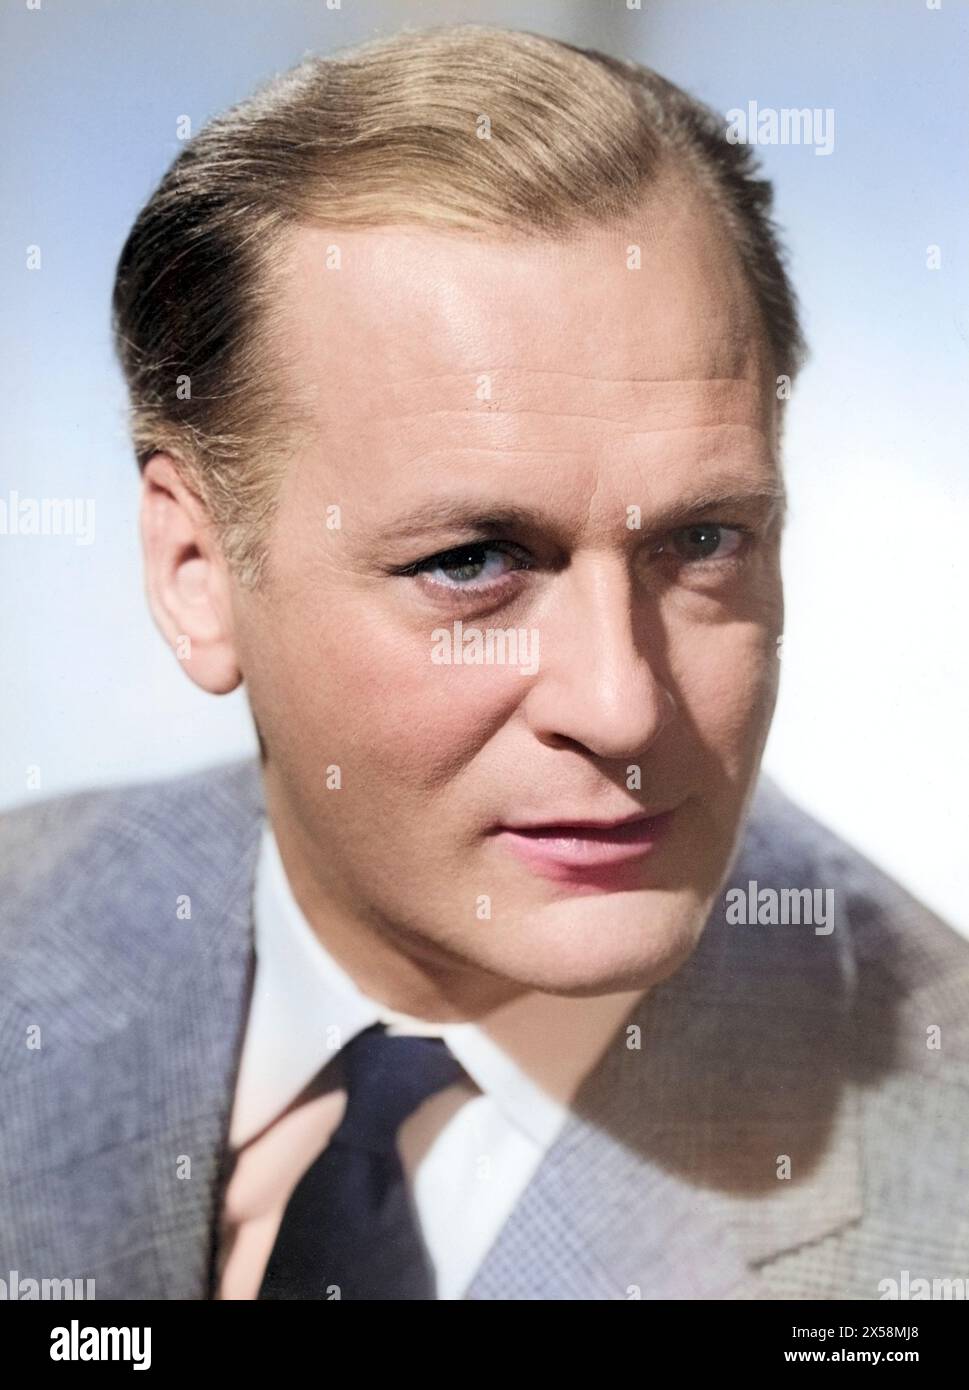 Juergens, Curd, 13.12.1915 - 18.6,1982, acteur allemand, portrait, 1960, ADDITIONAL-RIGHTS-LEARANCE-INFO-NOT-AVAILABLE Banque D'Images